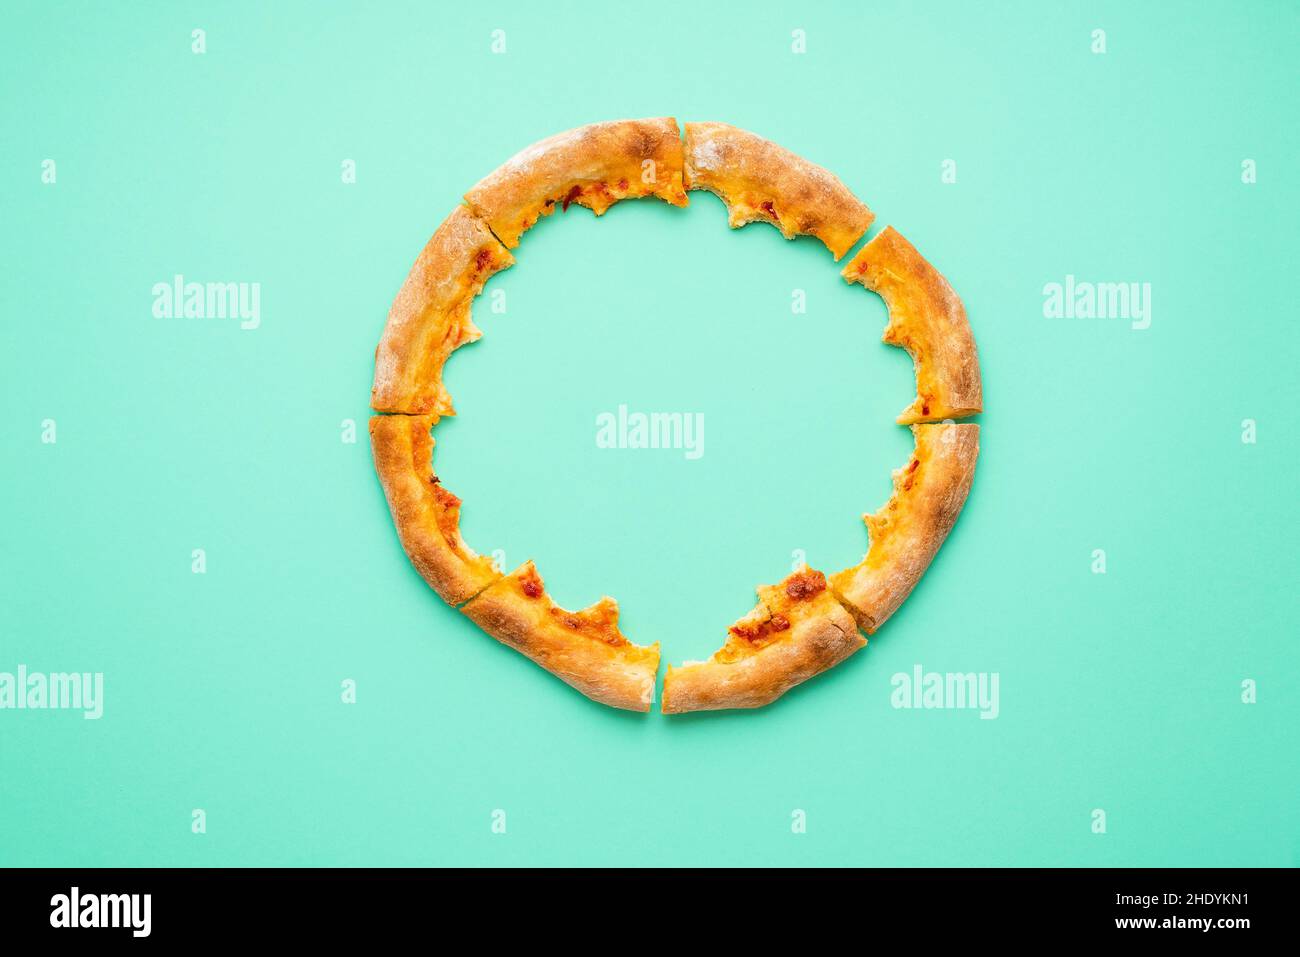 remains, pizza, crust, remain, pizzas, crusts Stock Photo